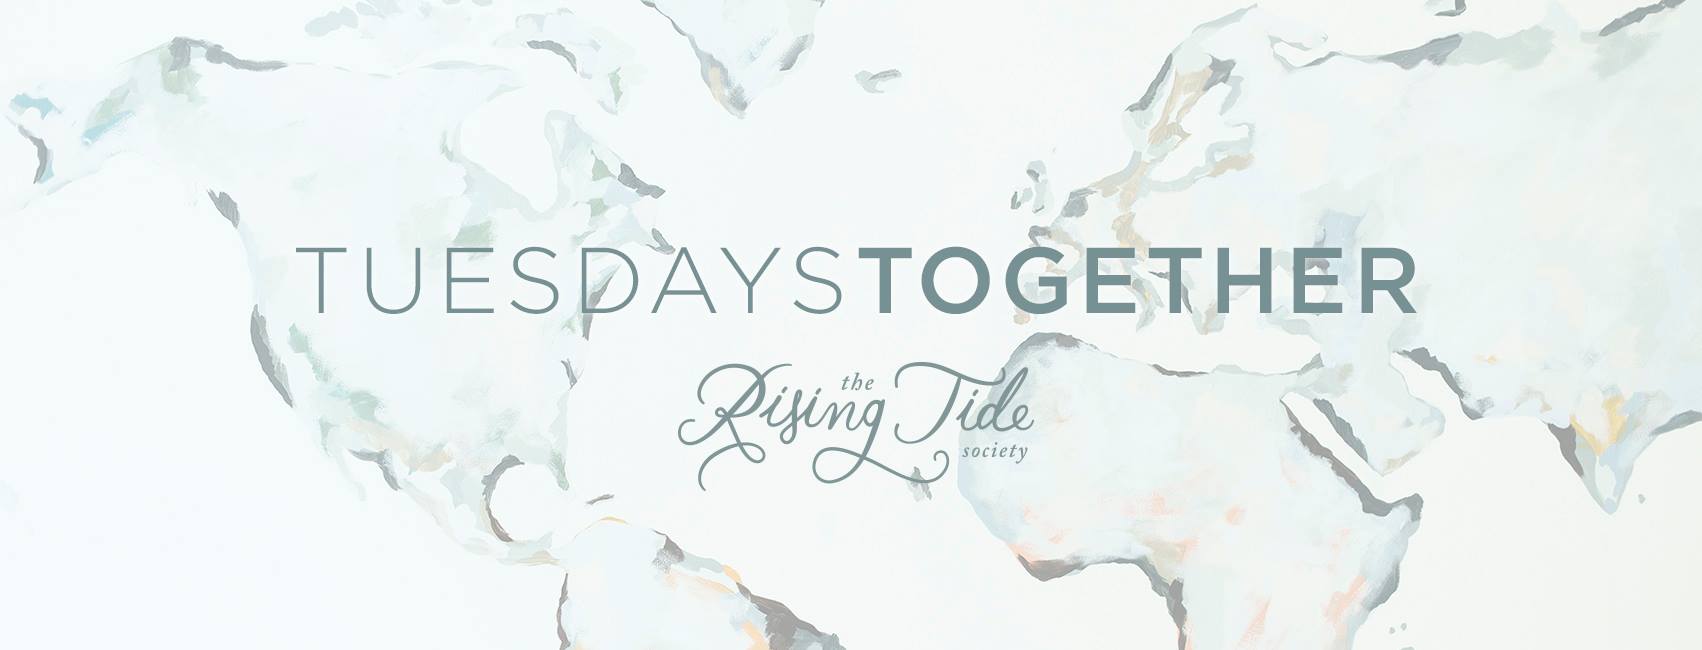 Central Jersey Tuesdays Together | Rising Tide Society